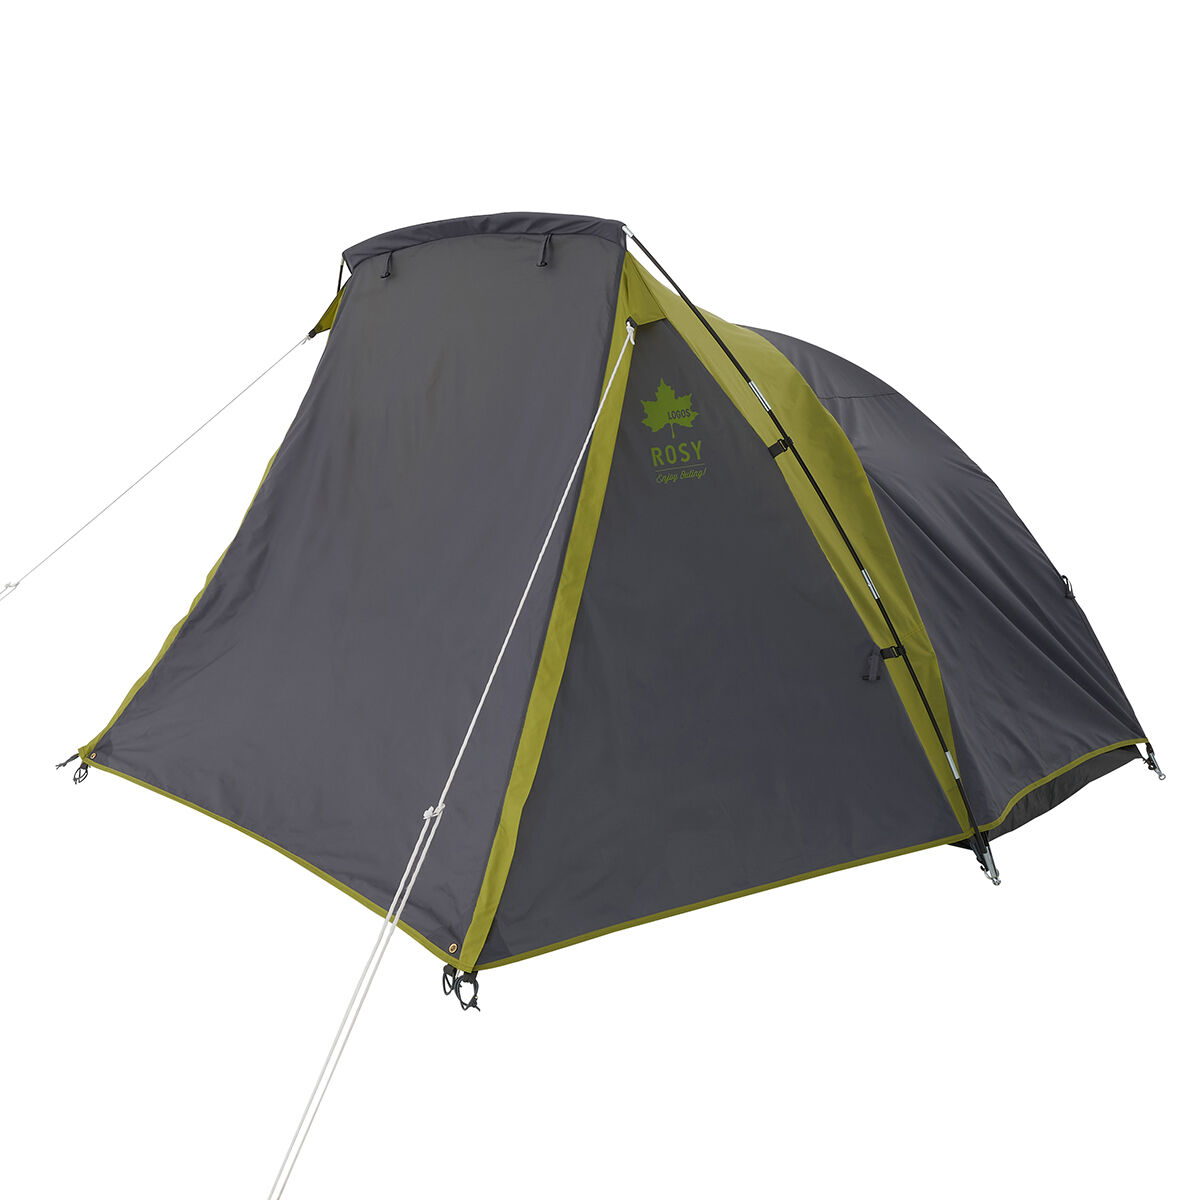 Shop Tents | LOGOS Official Global Online Store